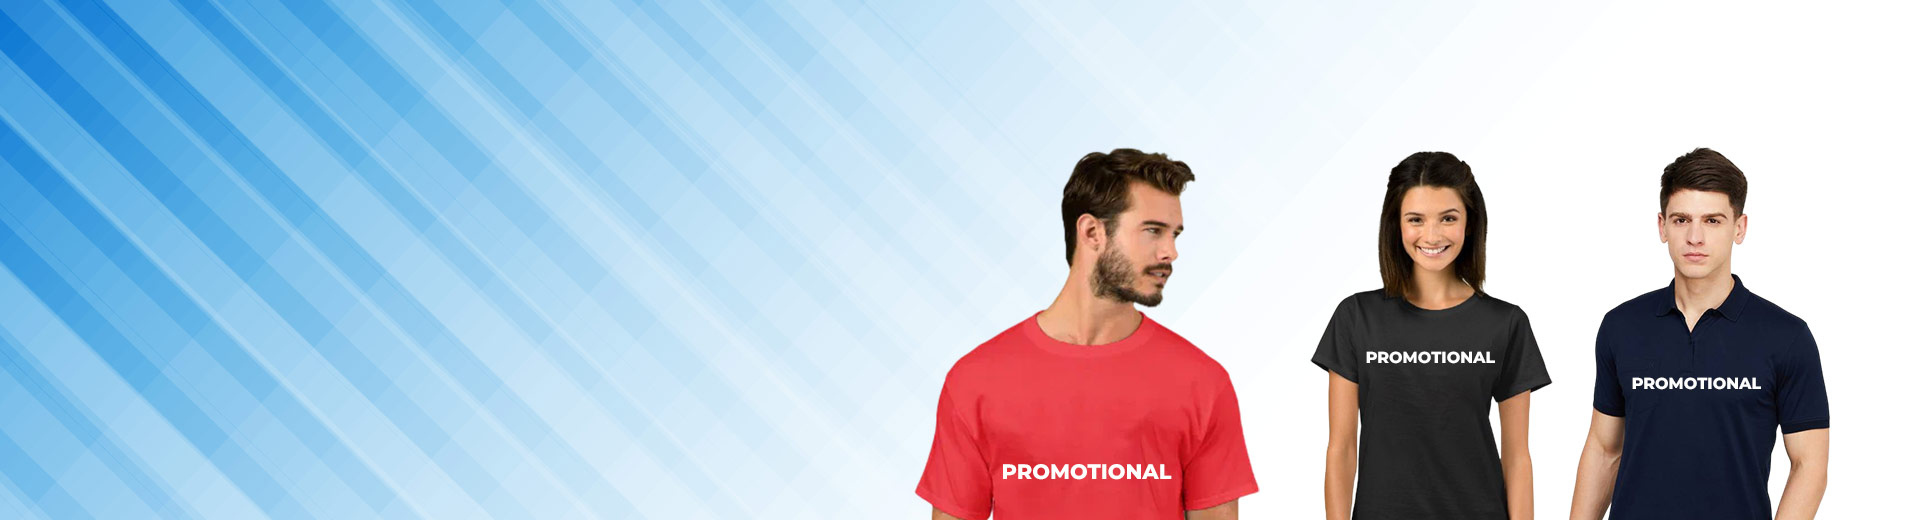 Promotional T Shirts Manufacturers in Gelsenkirchen